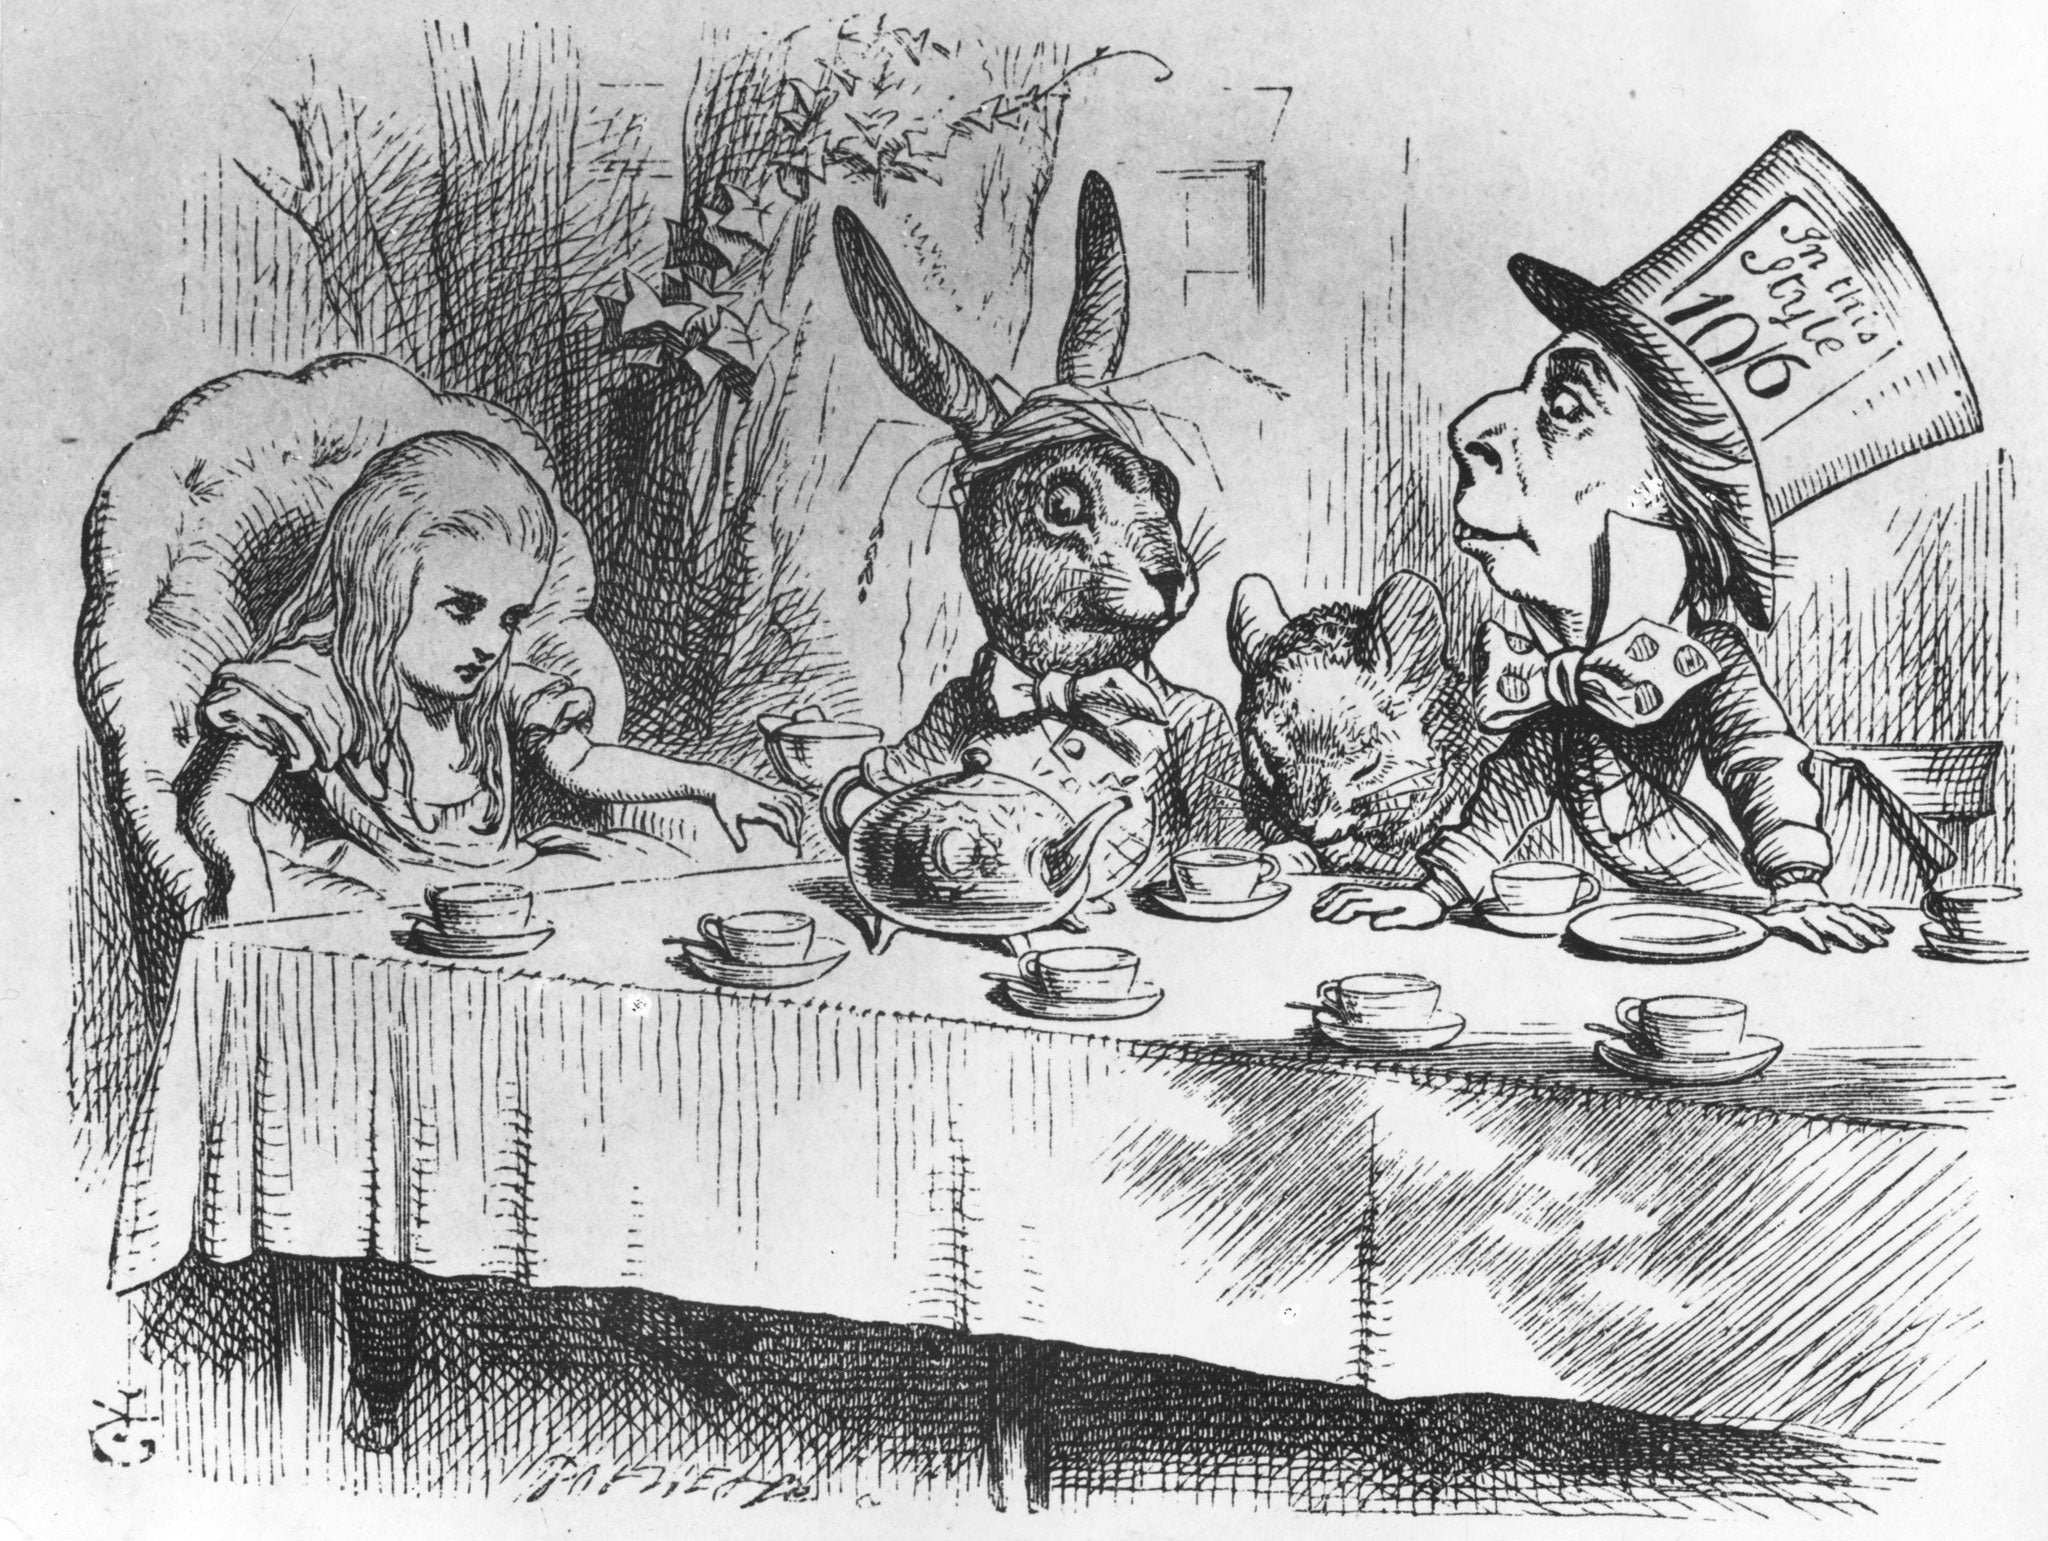 Exacting demands: One of John Tenniel's drawings for the book